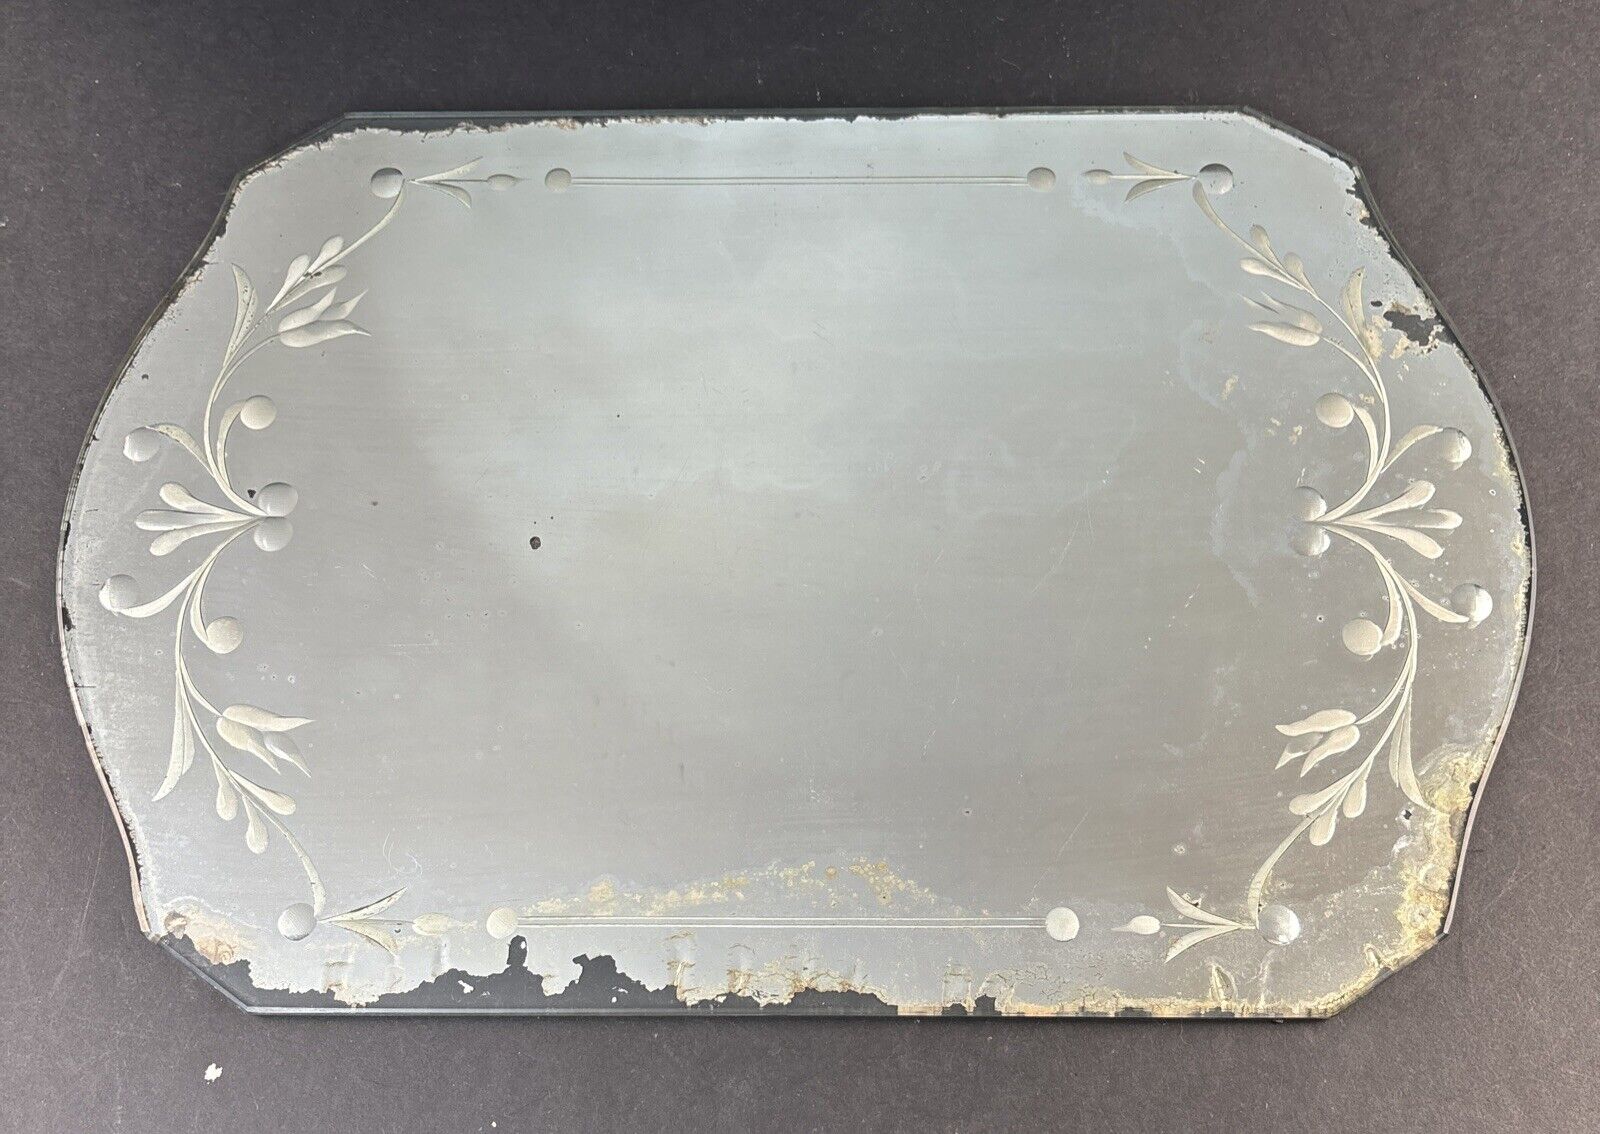 Vintage Art Deco Perfume Dresser Tray Frameless Mirror Etched floral 1930s-40s